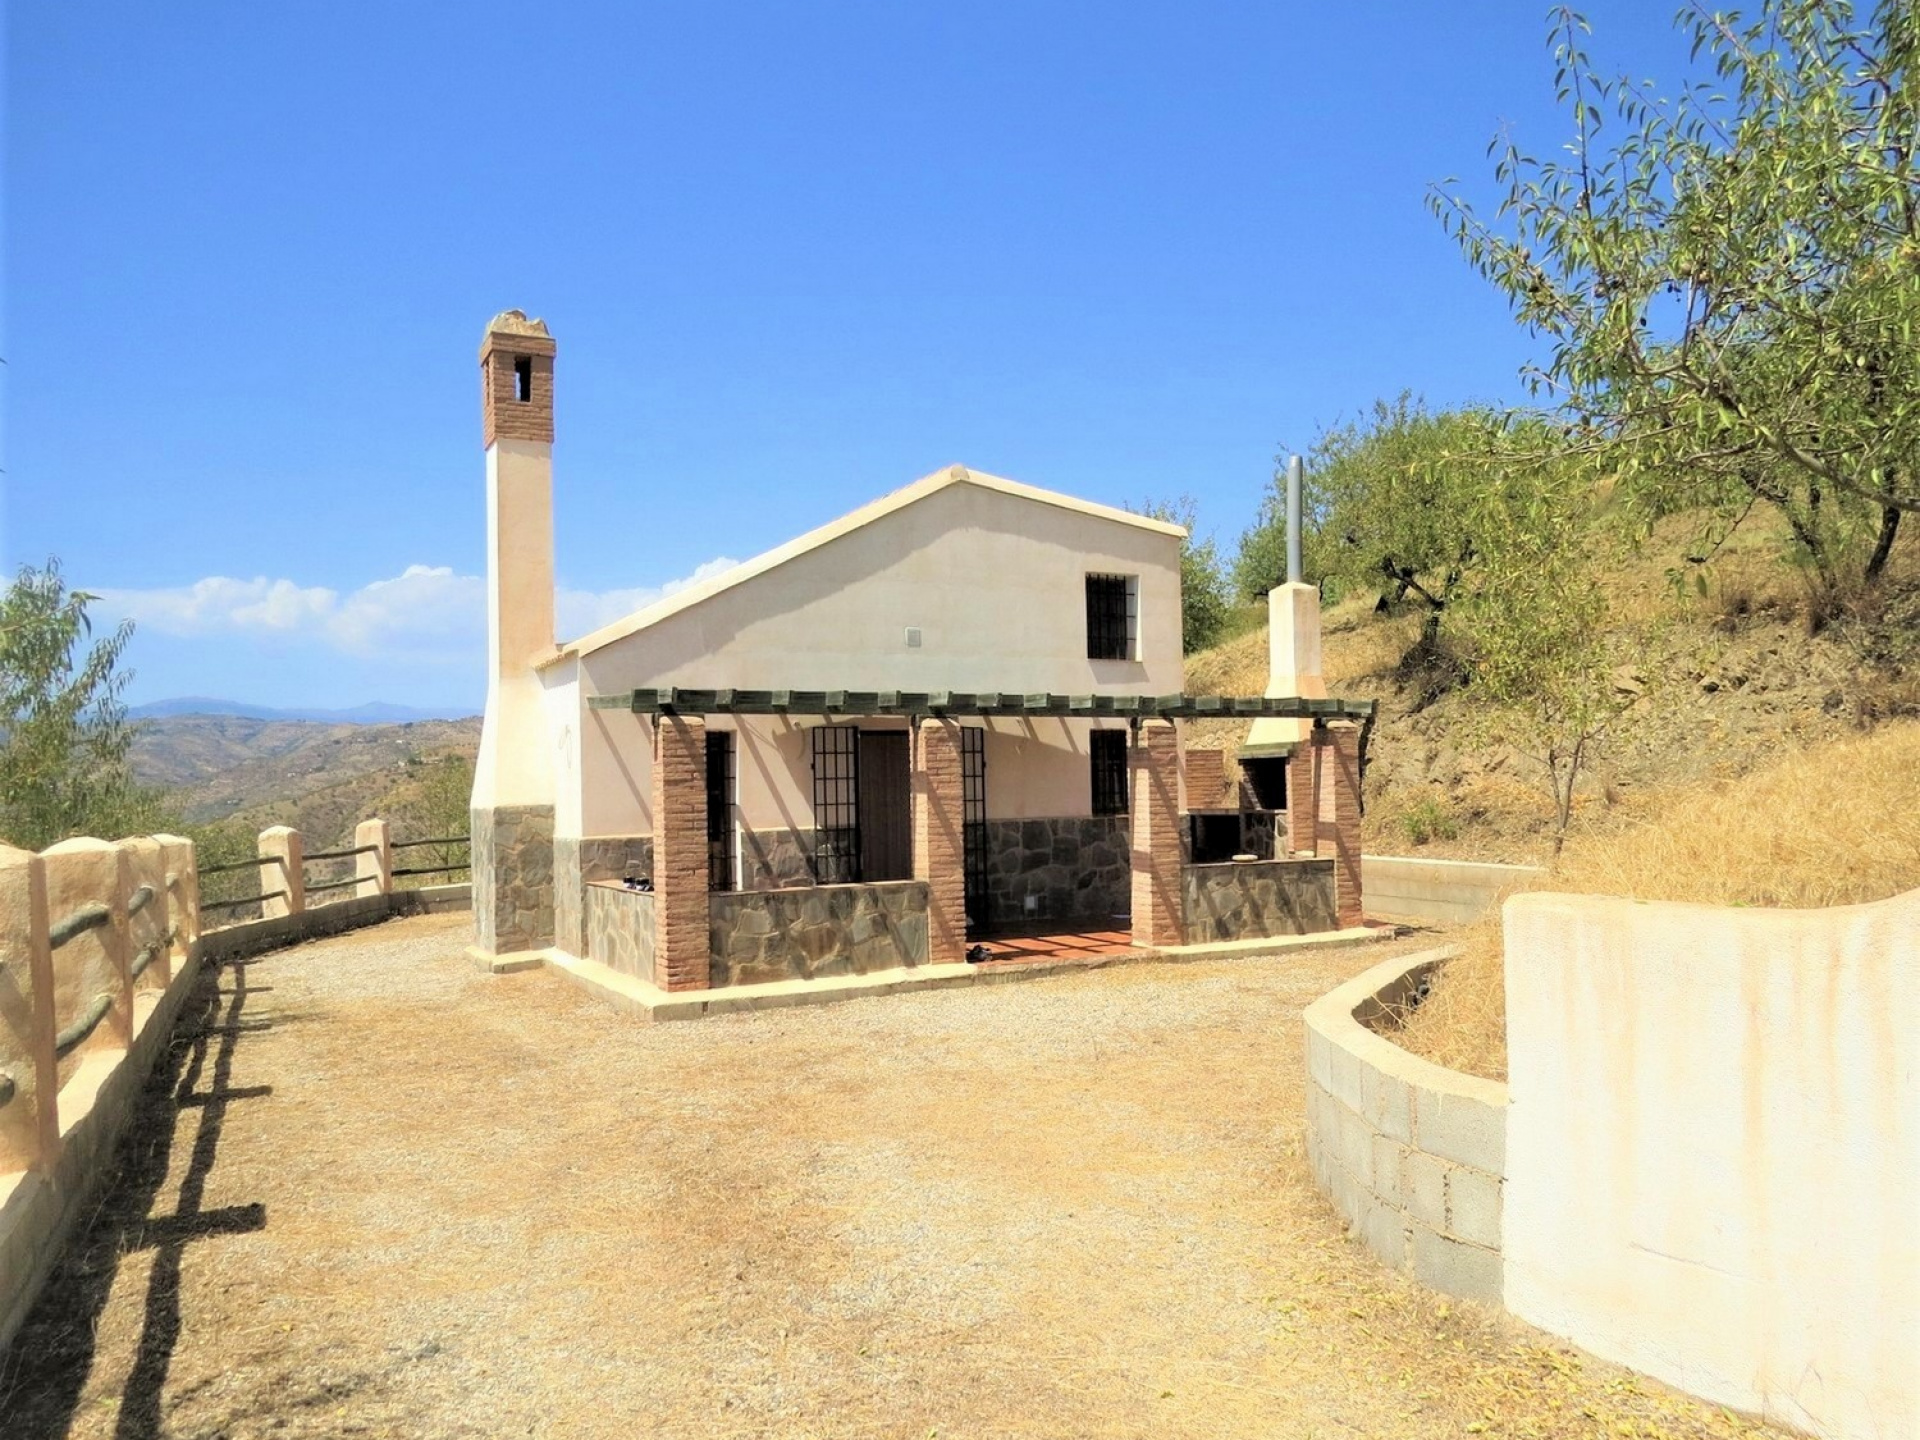 Superb Chalet Style Cortijo 